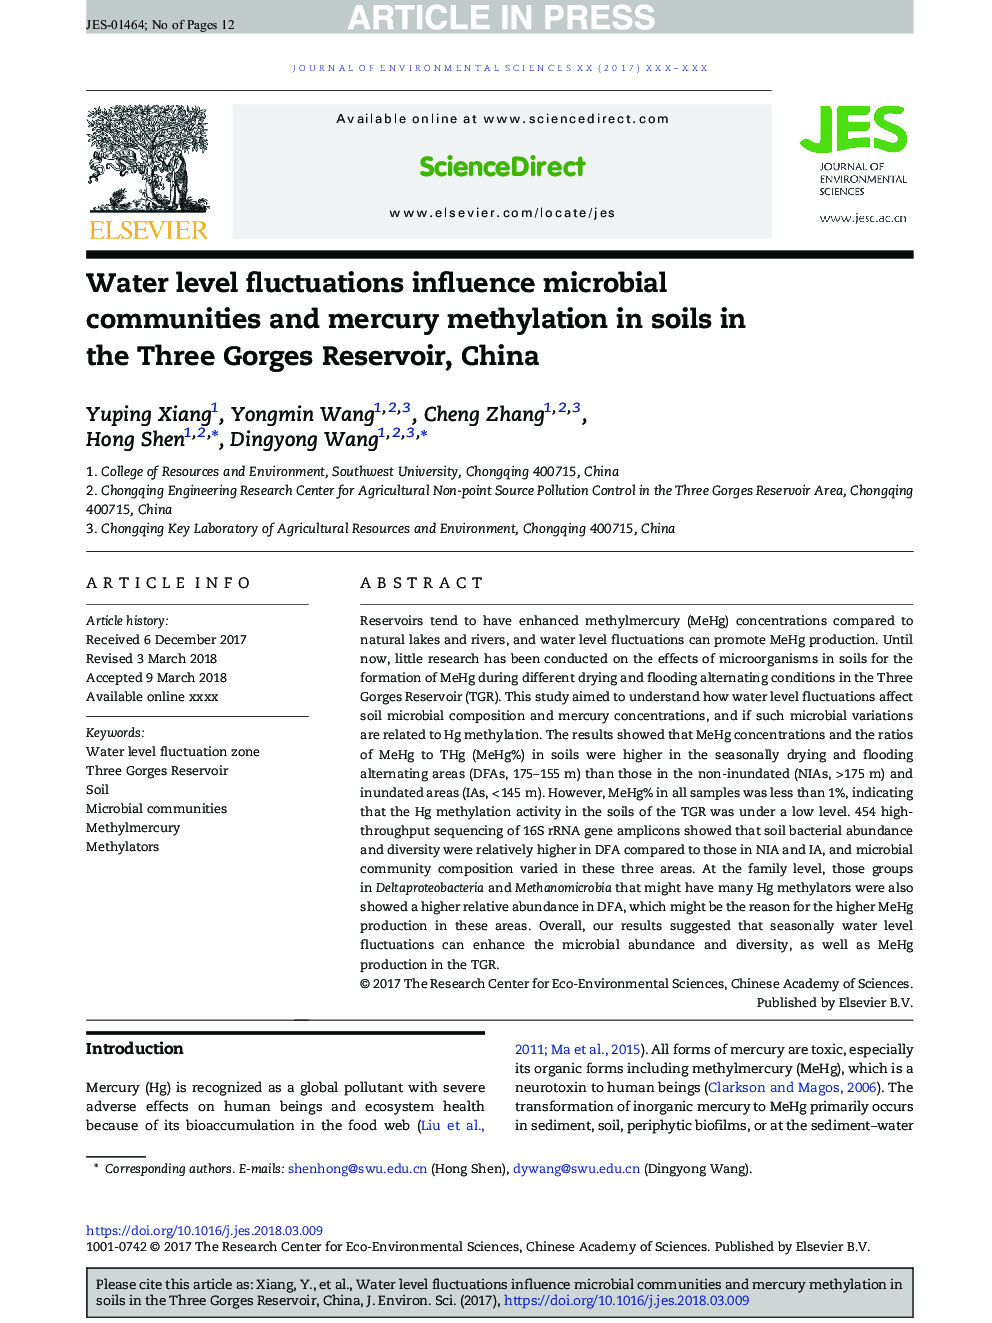 Water level fluctuations influence microbial communities and mercury methylation in soils in the Three Gorges Reservoir, China